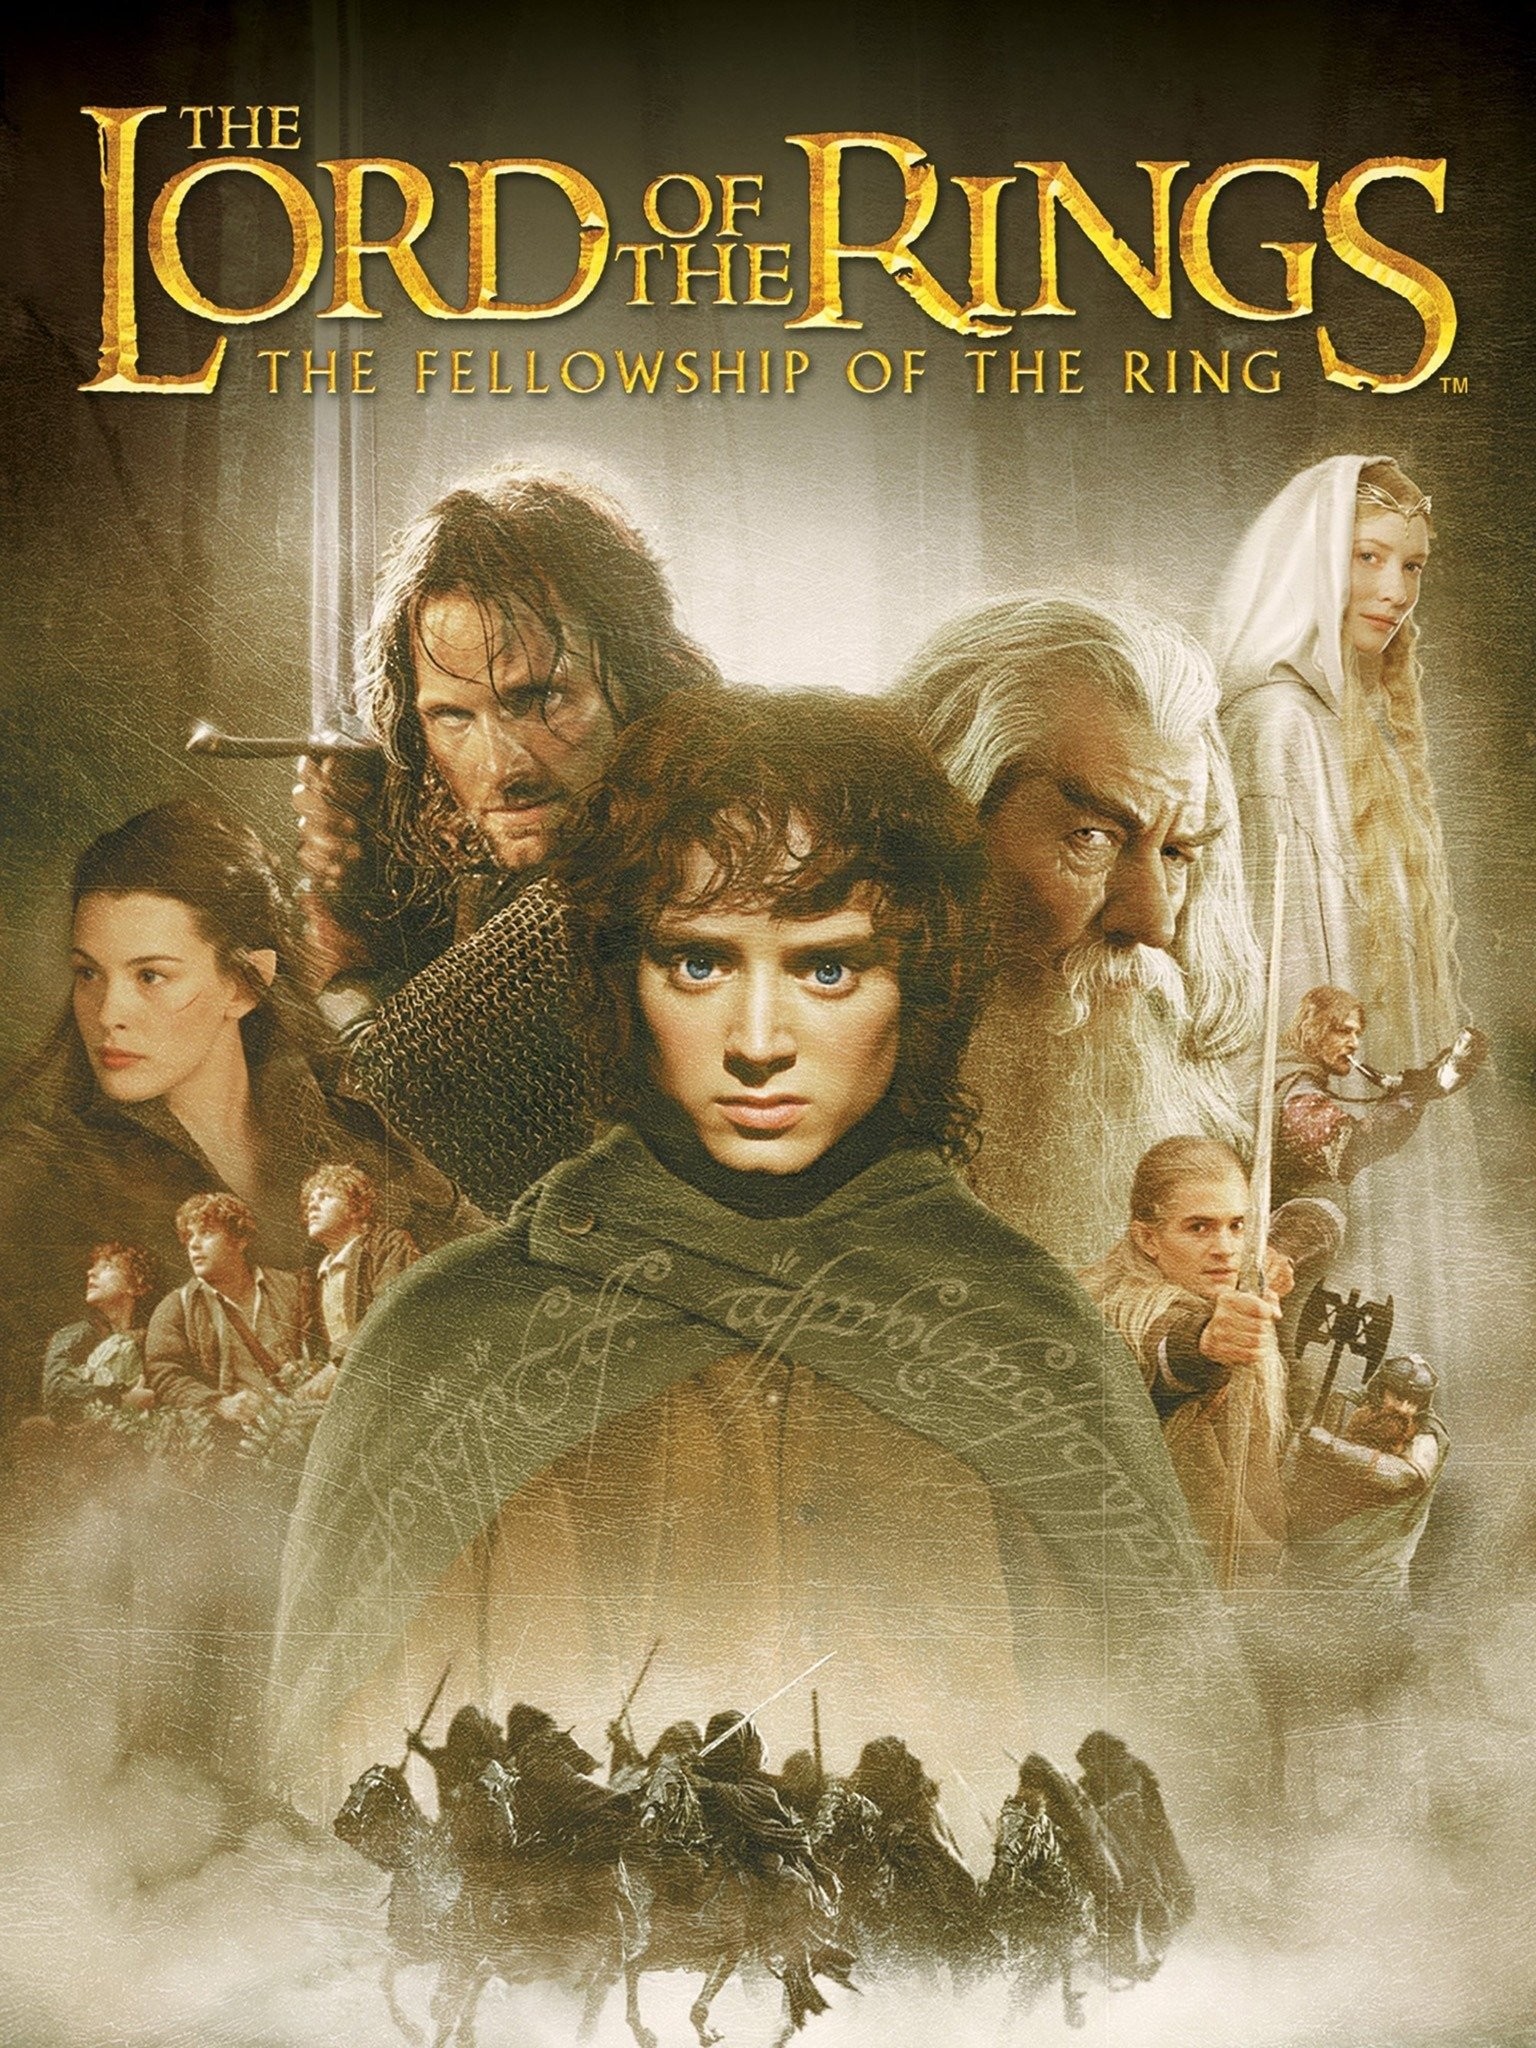 The Lord of the Rings: The Fellowship of the Ring: 4K Remaster Trailer 1 -  Trailers & Videos - Rotten Tomatoes